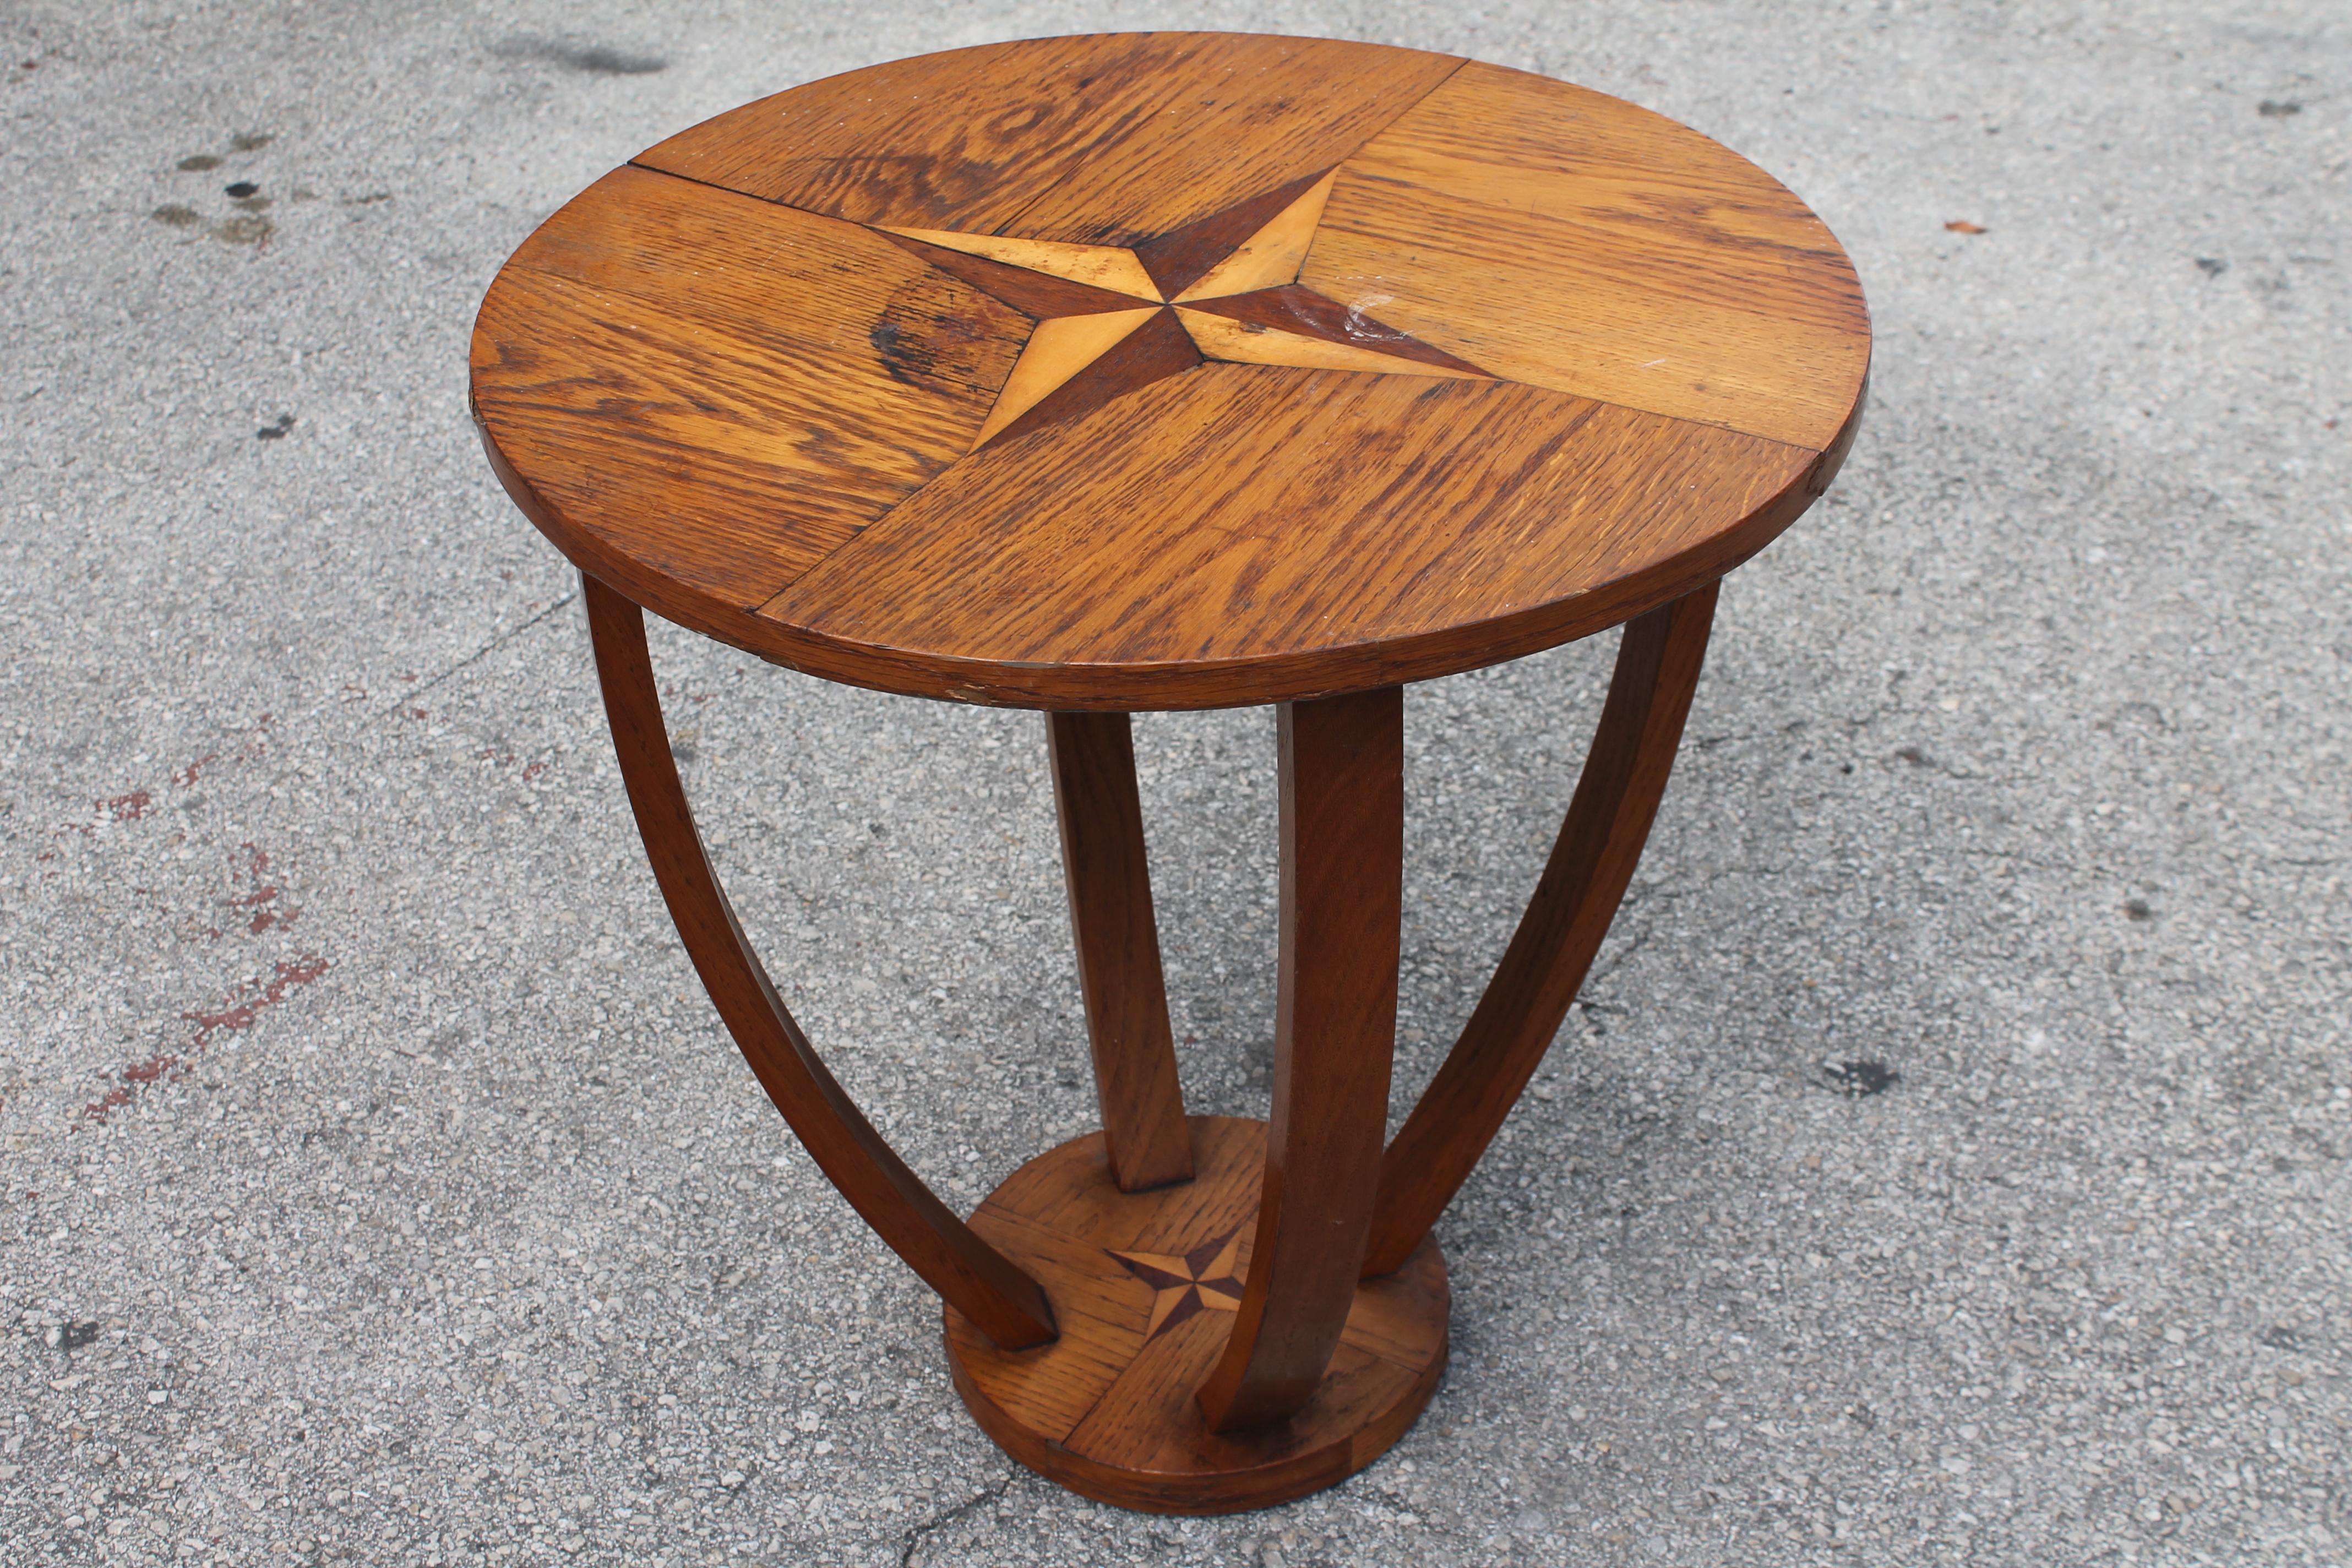 1930's French Art Deco Medium Wood Tone Round Accent / Side Table. Compass wood inlay. 2 level. Beautiful table.